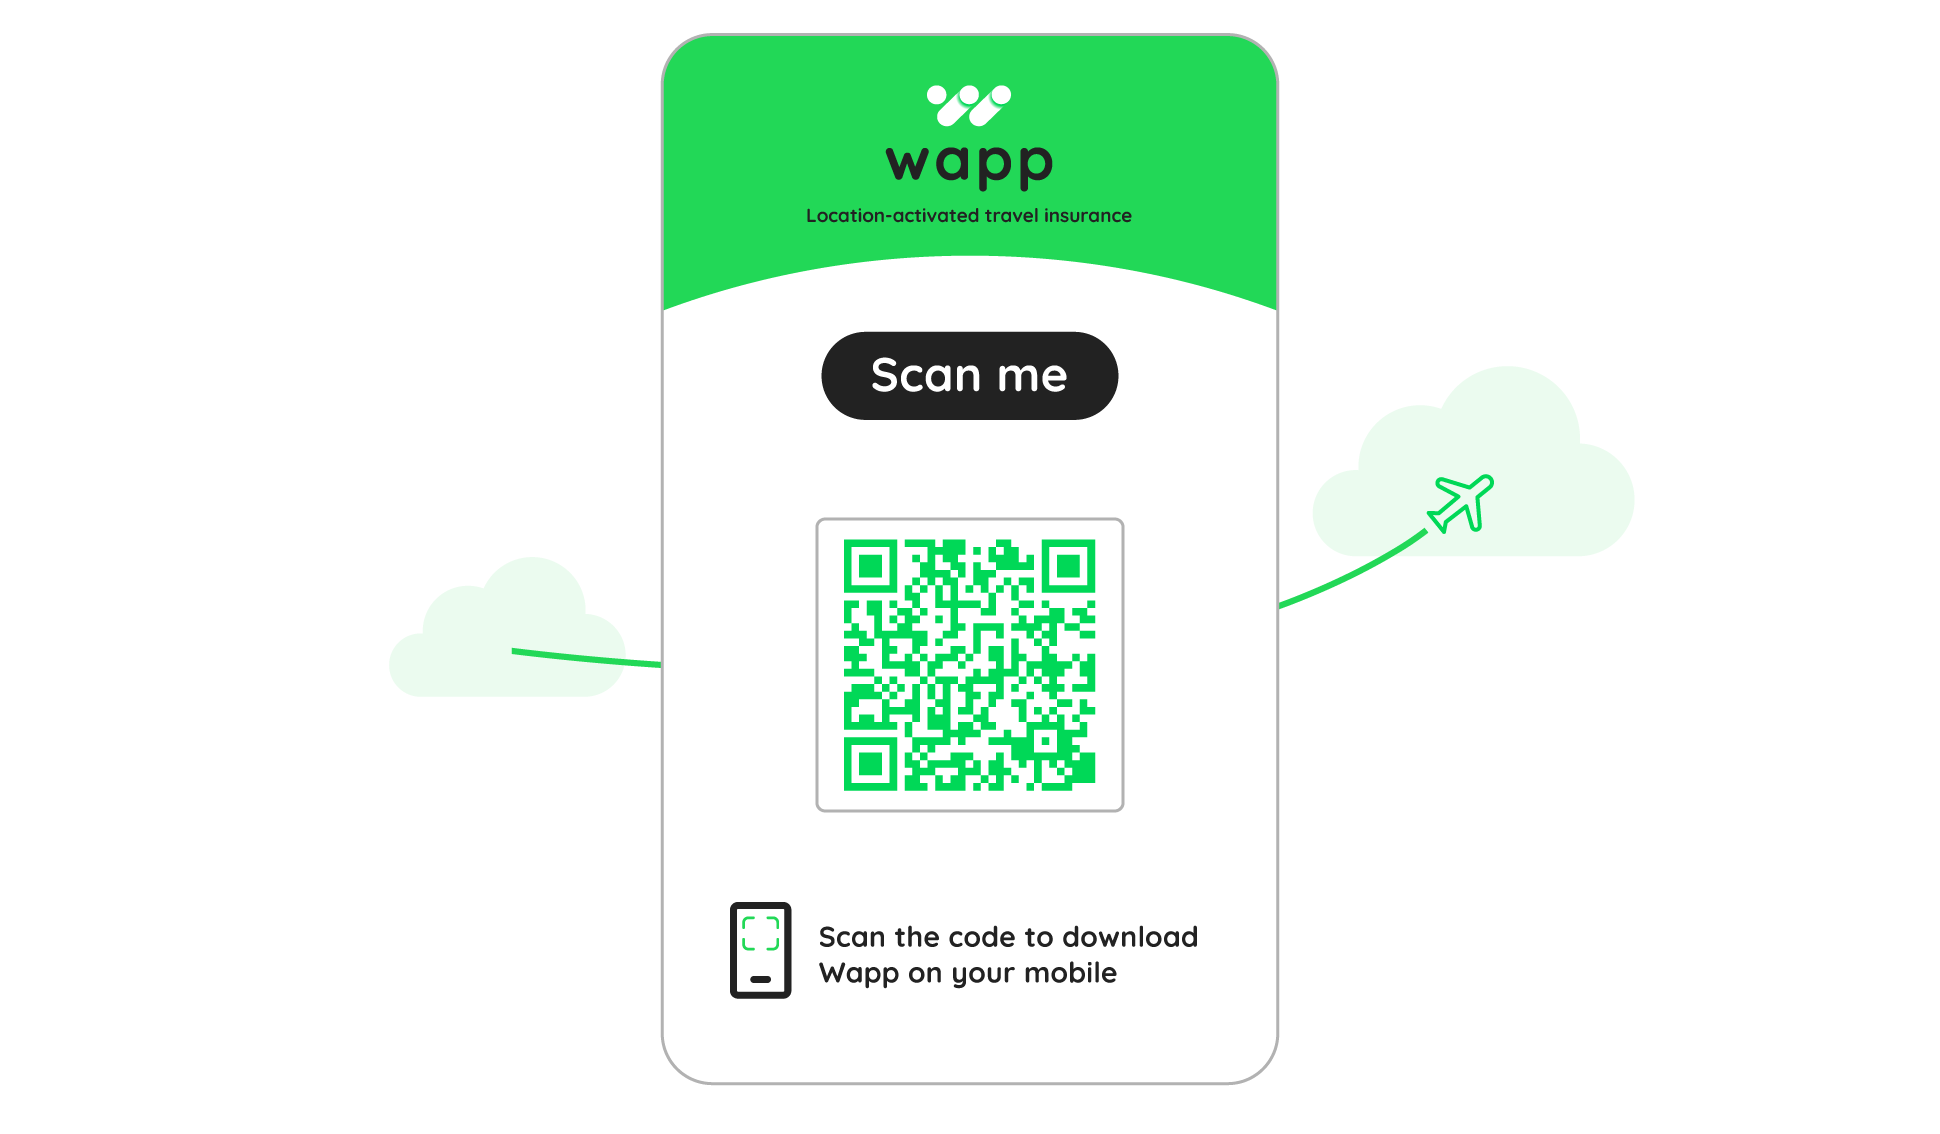 Download Wapp with your phone using this QR code